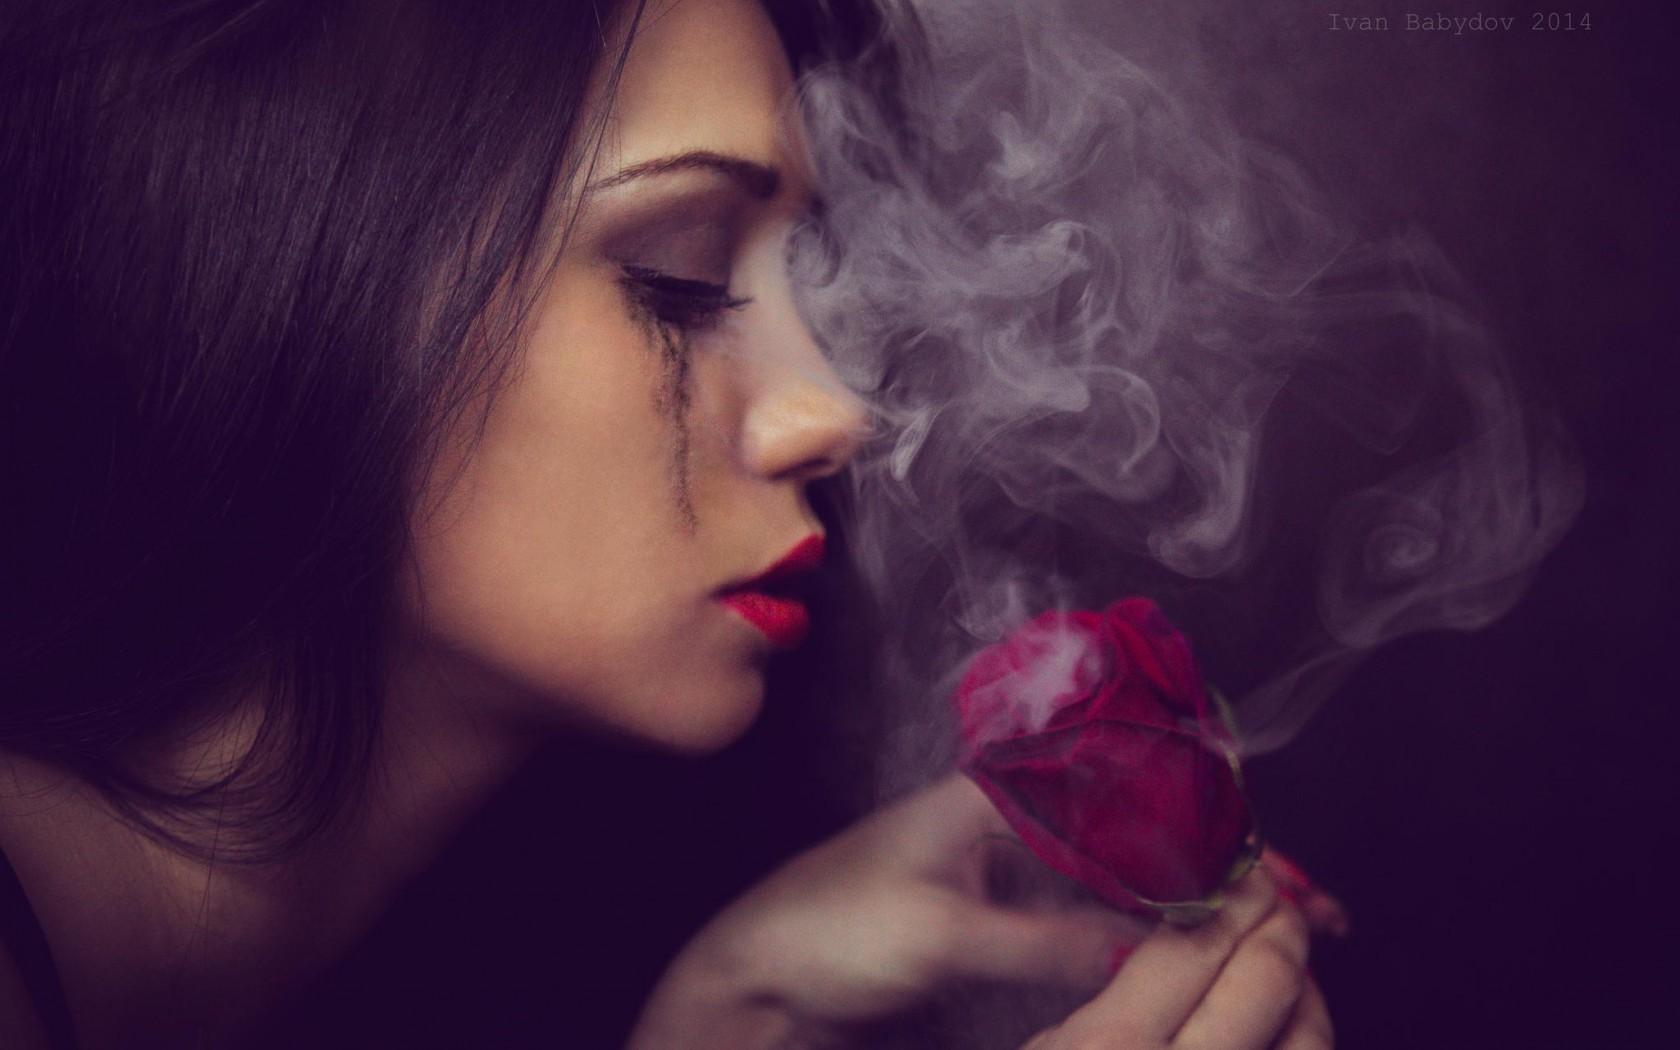 The girl looks at smoking rose wallpaper and image